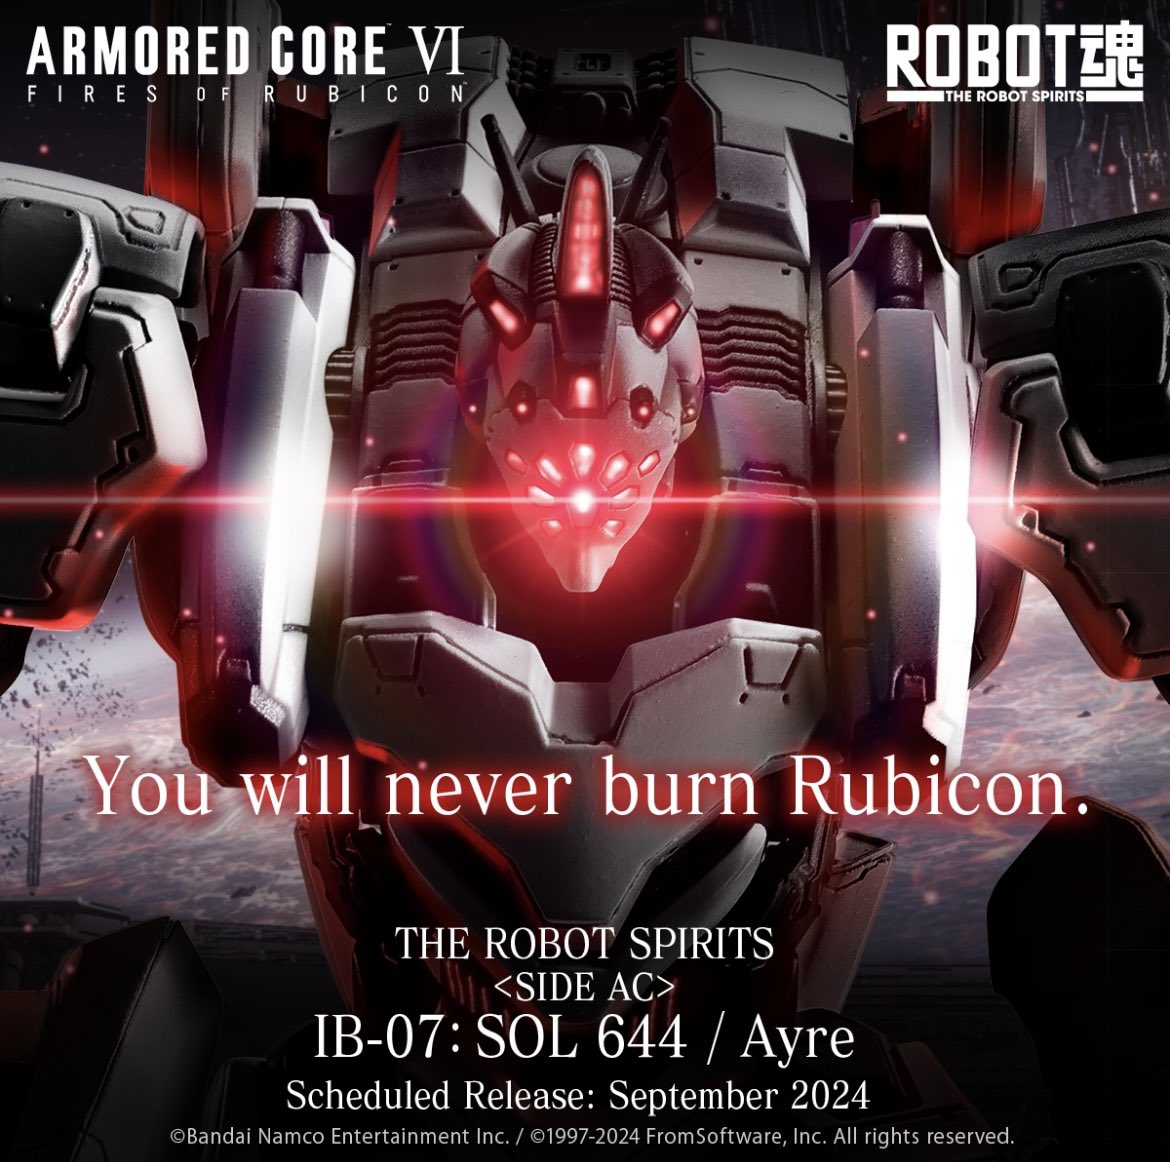 'You will never burn Rubicon.'

From 'ARMORED CORE VI FIRES OF RUBICON' THE ROBOT SPIRITS is releasing < SIDE AC> IB-07: SOL 644 / Ayre!!

Scheduled to be released in September 2024, more information coming soon...!

#ARMOREDCORE #therobotspirits #tamashiinations